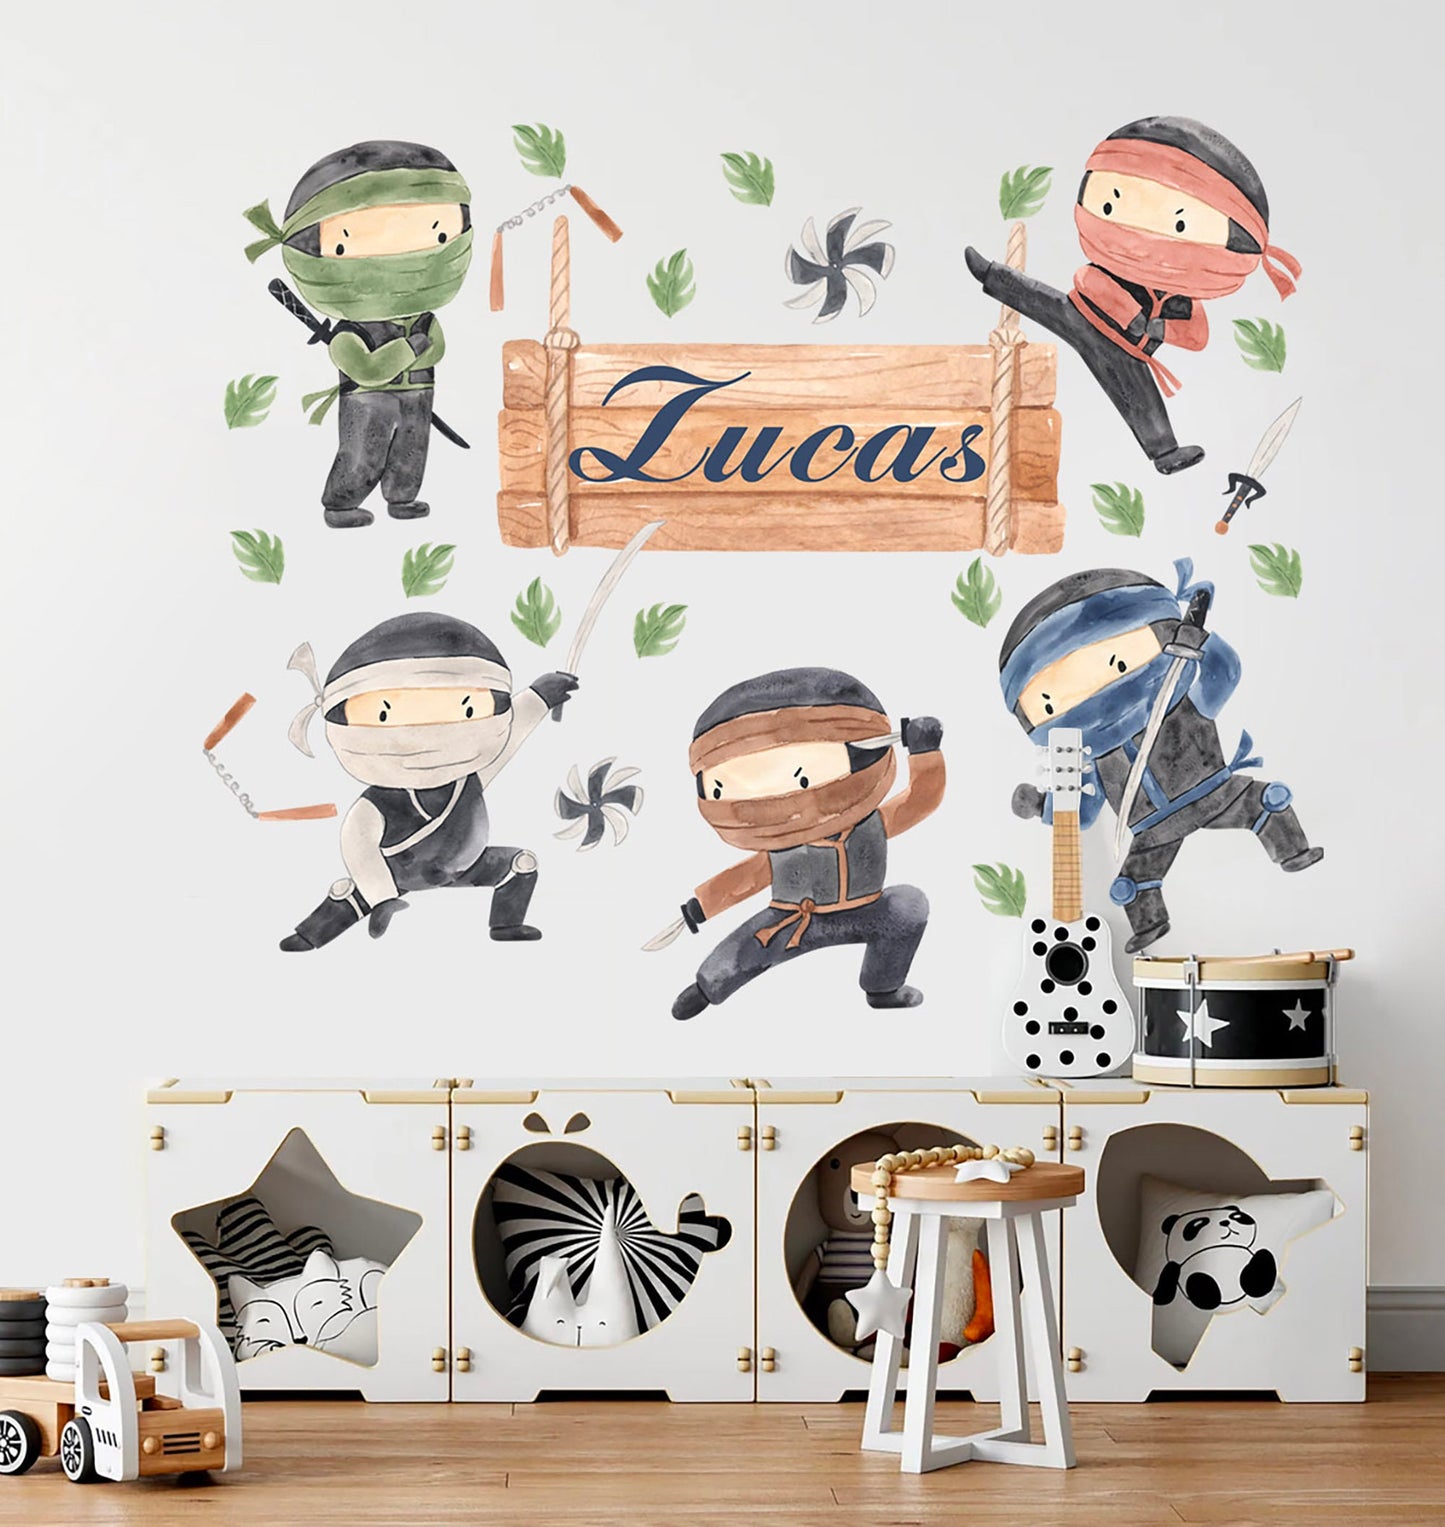 Personalized Name Customizable Ninja Warriors Action Wood Plaque Wall Decal - BR304